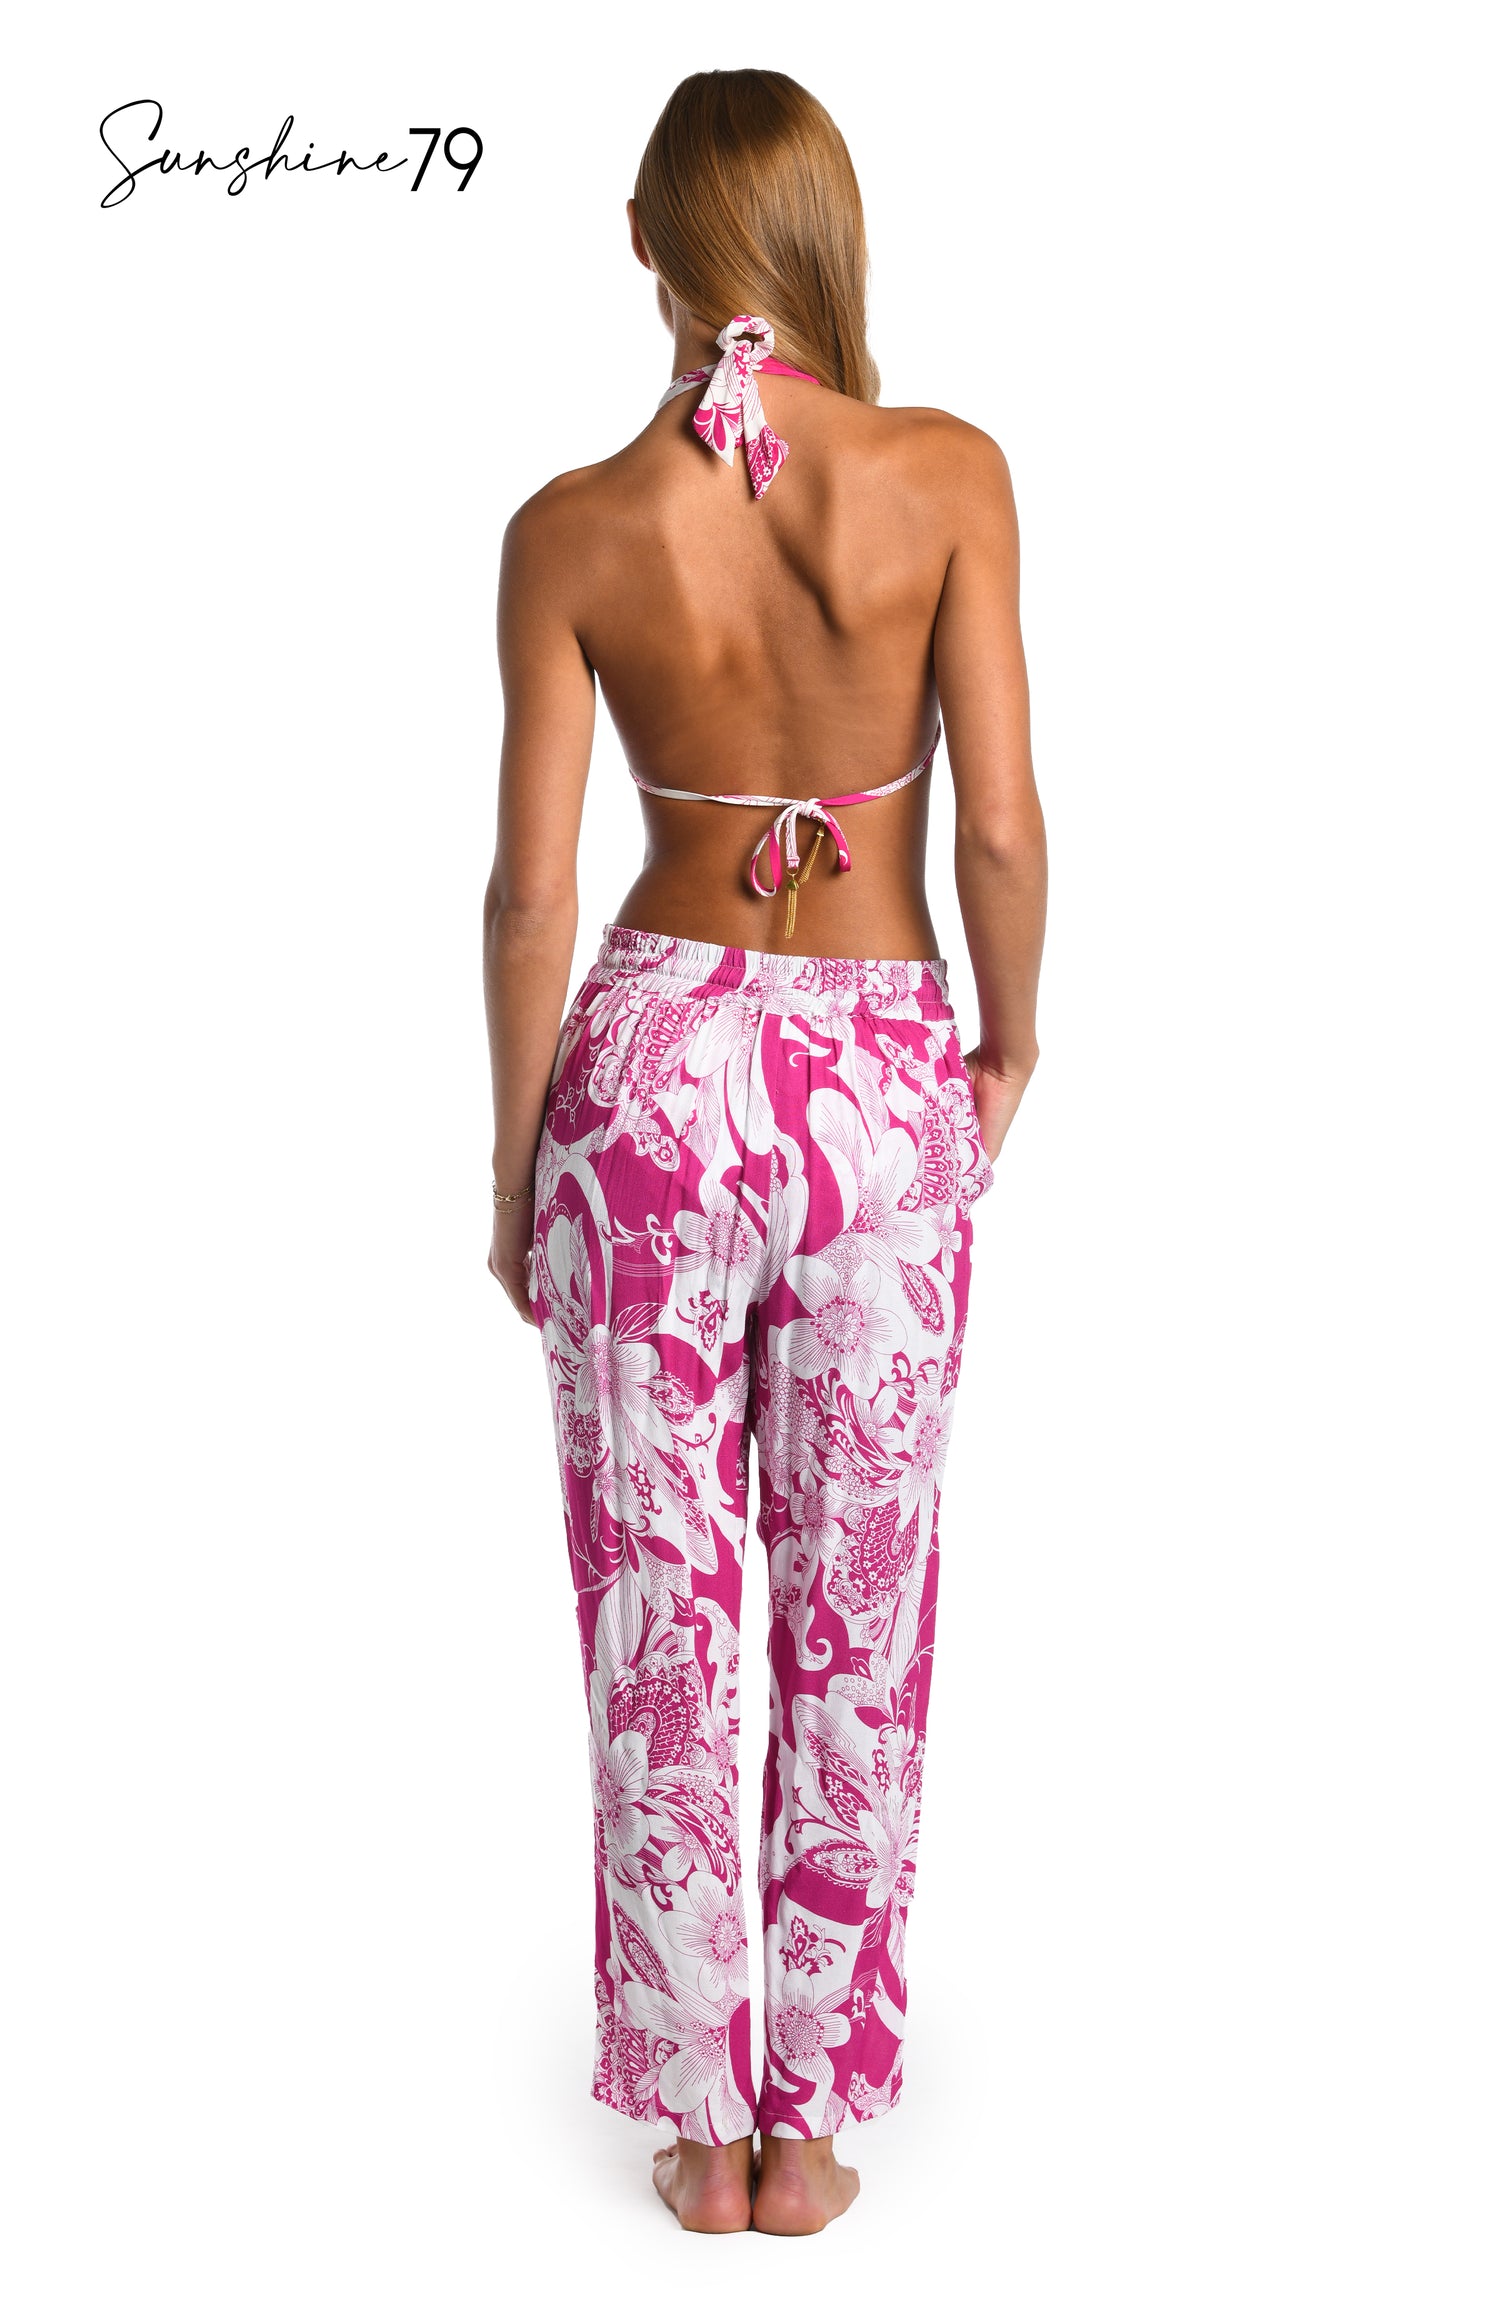 Model is wearing a fuchsia and white multicolored tropical printed beach pant cover up from our Sunshine 79 brand.